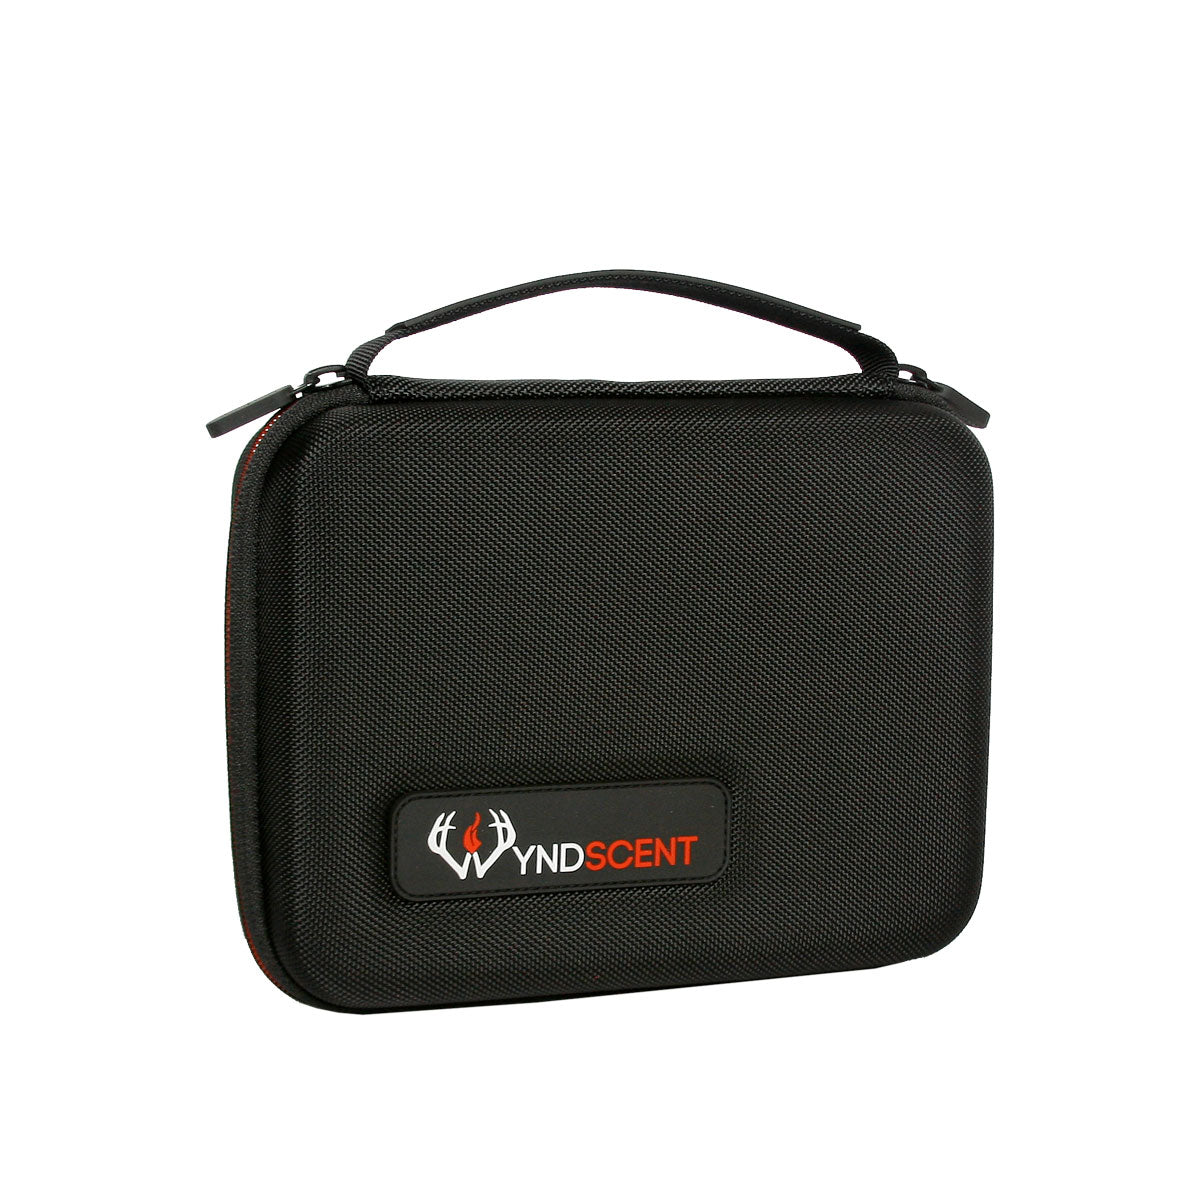 Wyndscent Mini Carry Pouch with Belt Clip